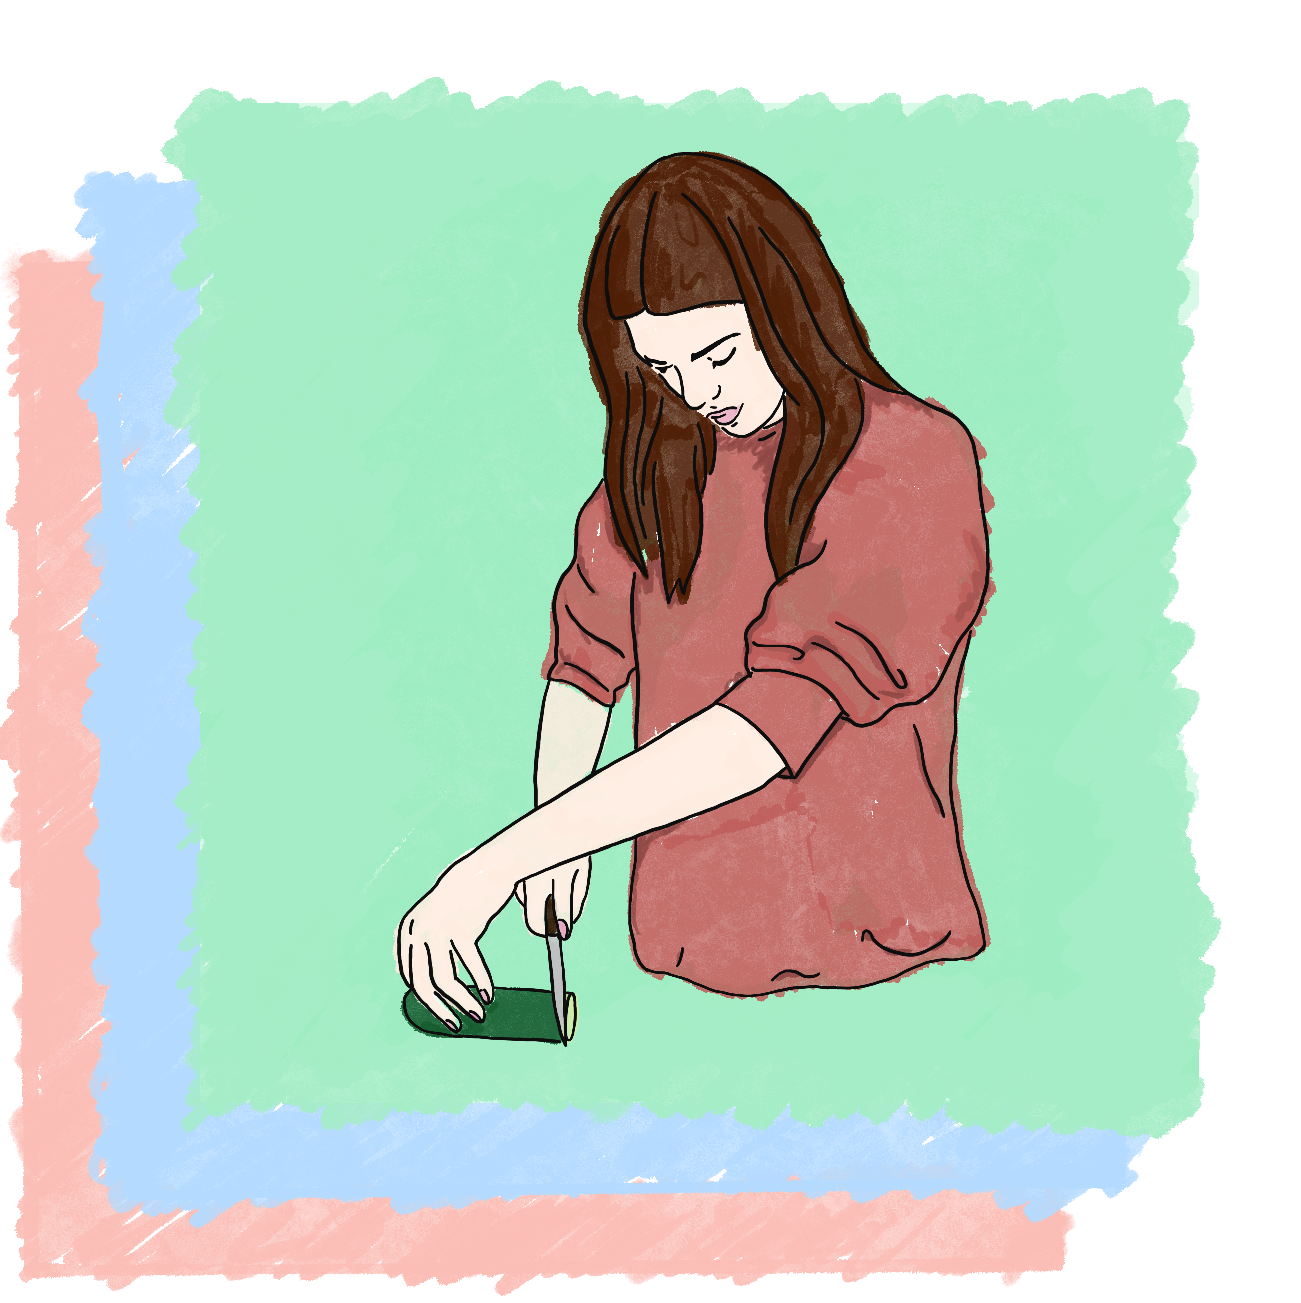 Kendall Jenner cutting a cucumber, illustrated